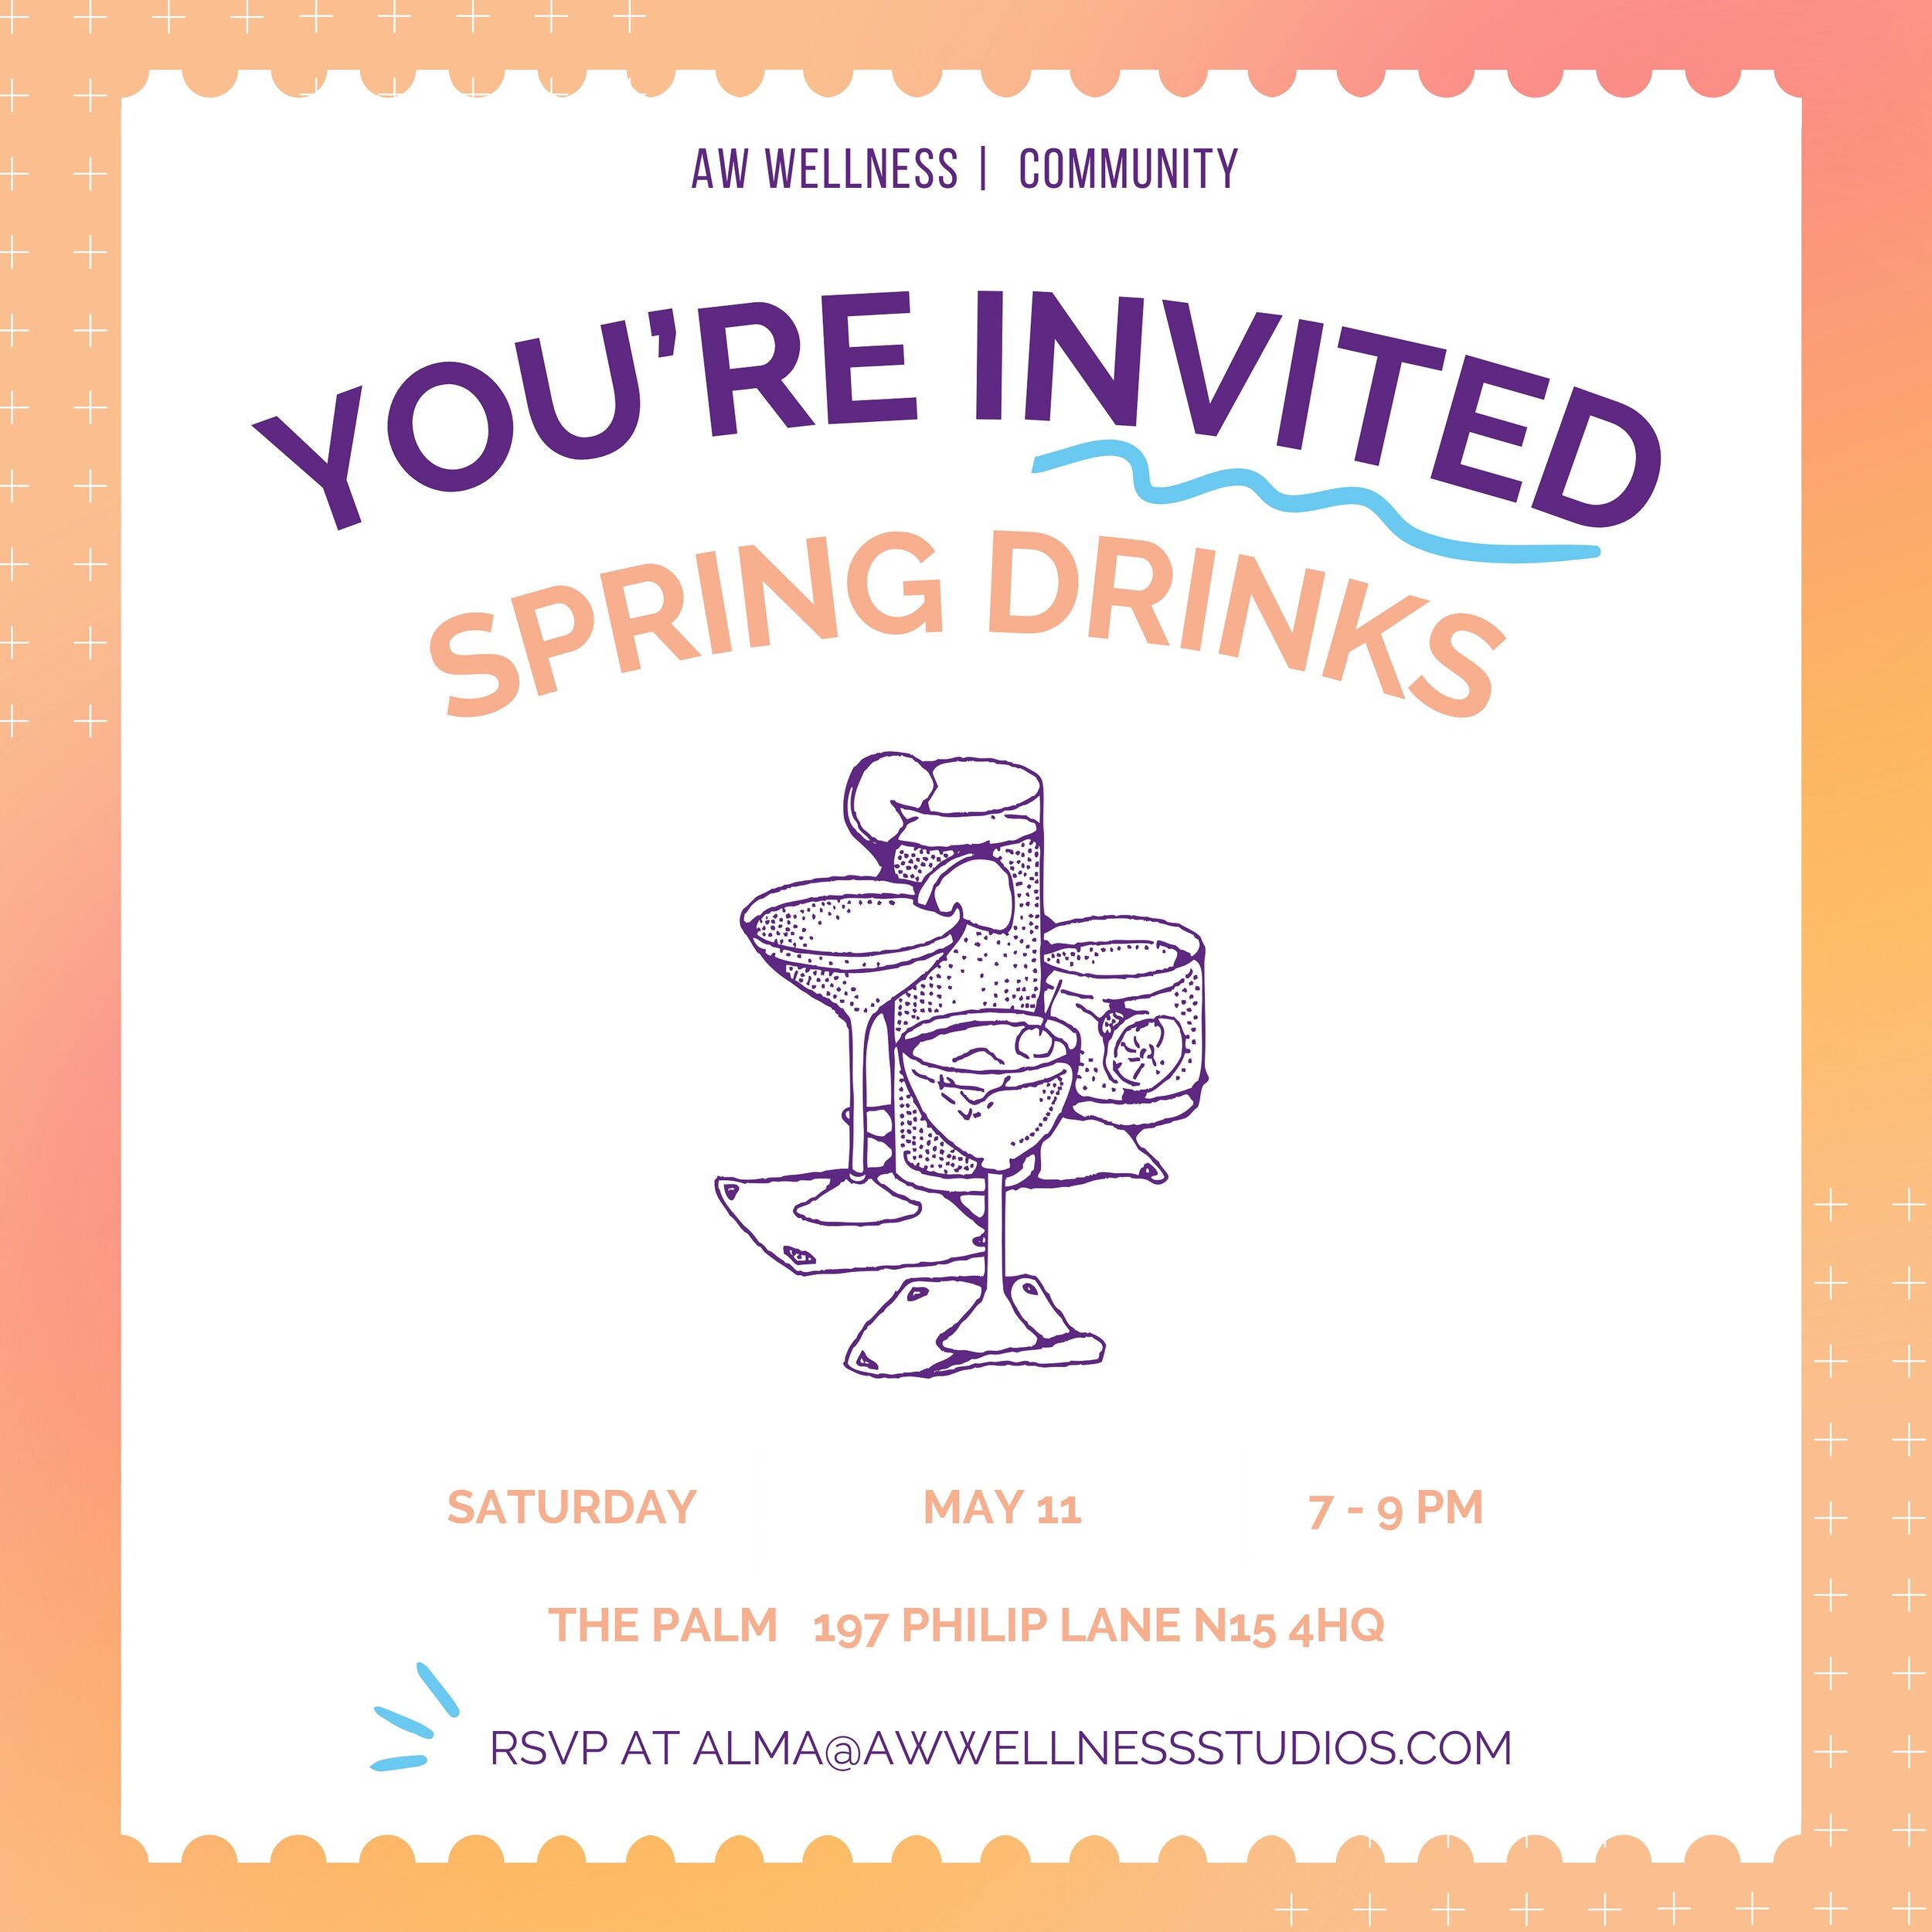 Join us for an evening of fun at The Palm in Tottenham on the 11th May at 7-9pm. 

An opportunity to unwind, connect, and share a toast with our awesome studio community.

Whether you&rsquo;re looking to make new friends, catch up with old ones, or s